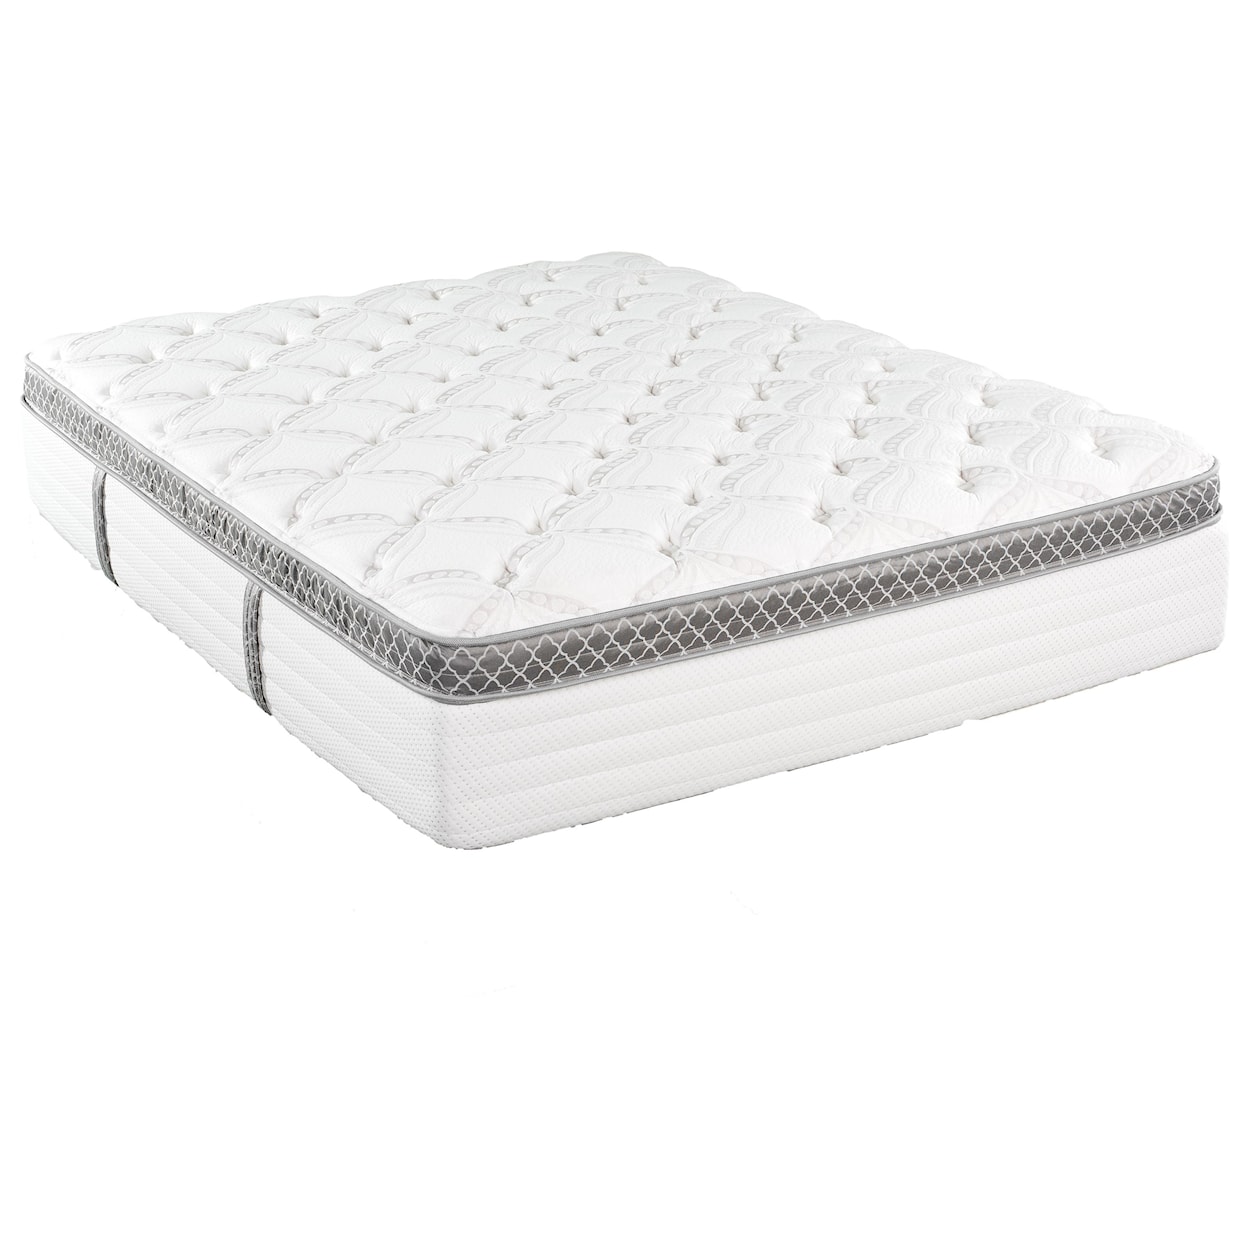 King Koil Madelyn Pillow Top Cal King Pillow Top Pocketed Coil Mattress